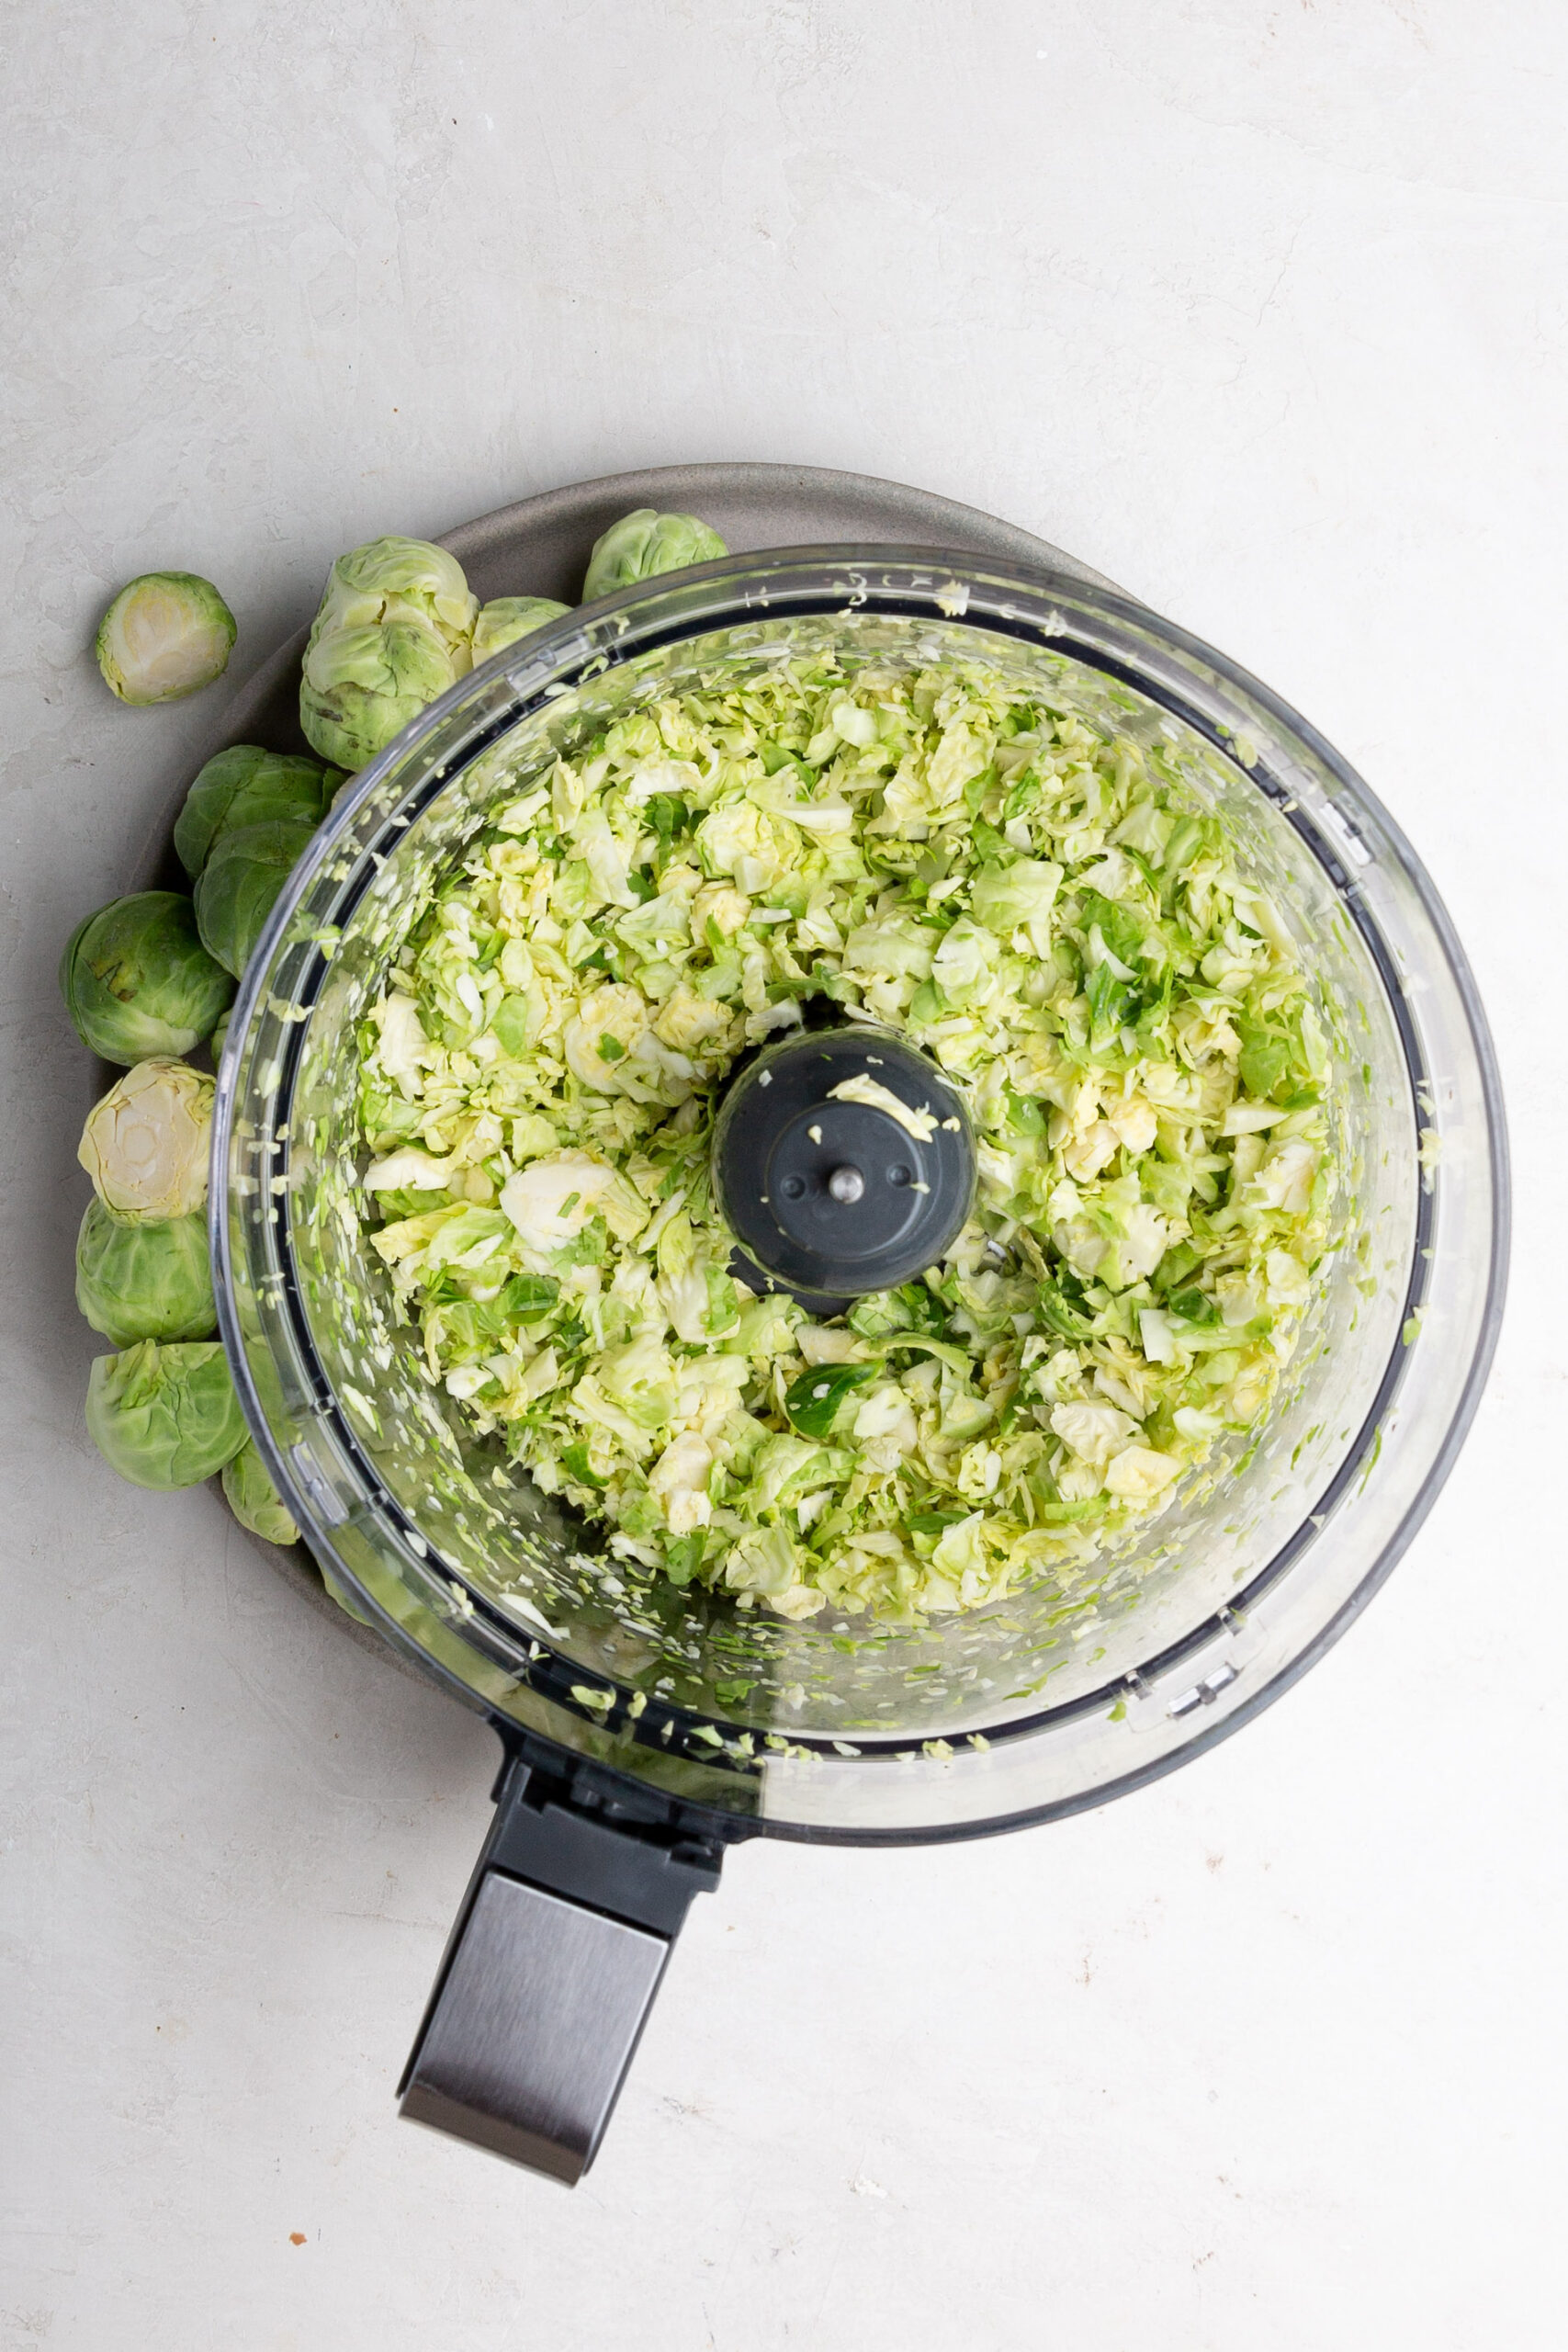 Description: Brussels sprouts in a food processor.